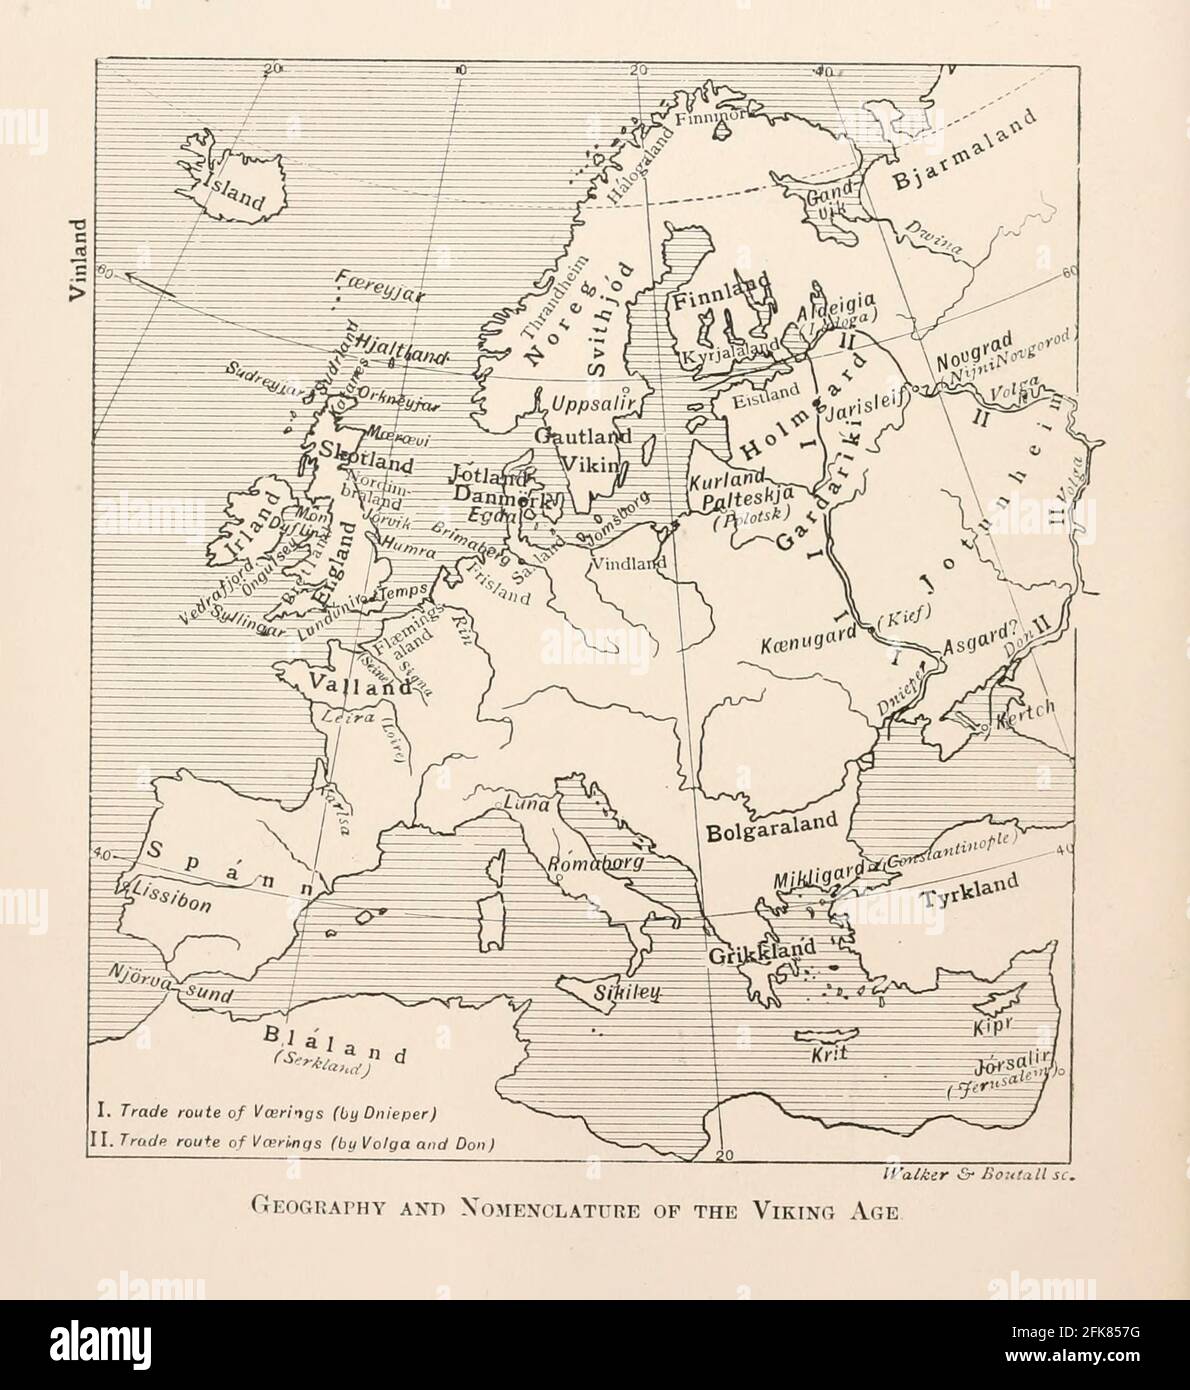 Geography And Nomenclature Of The Viking Age from the book '  The viking age: the early history, manners, and customs of the ancestors of the English speaking nations ' by Du Chaillu, (Paul Belloni), 1835-1903 Publication date 1889 by C. Scribner's sons in New York, Stock Photo